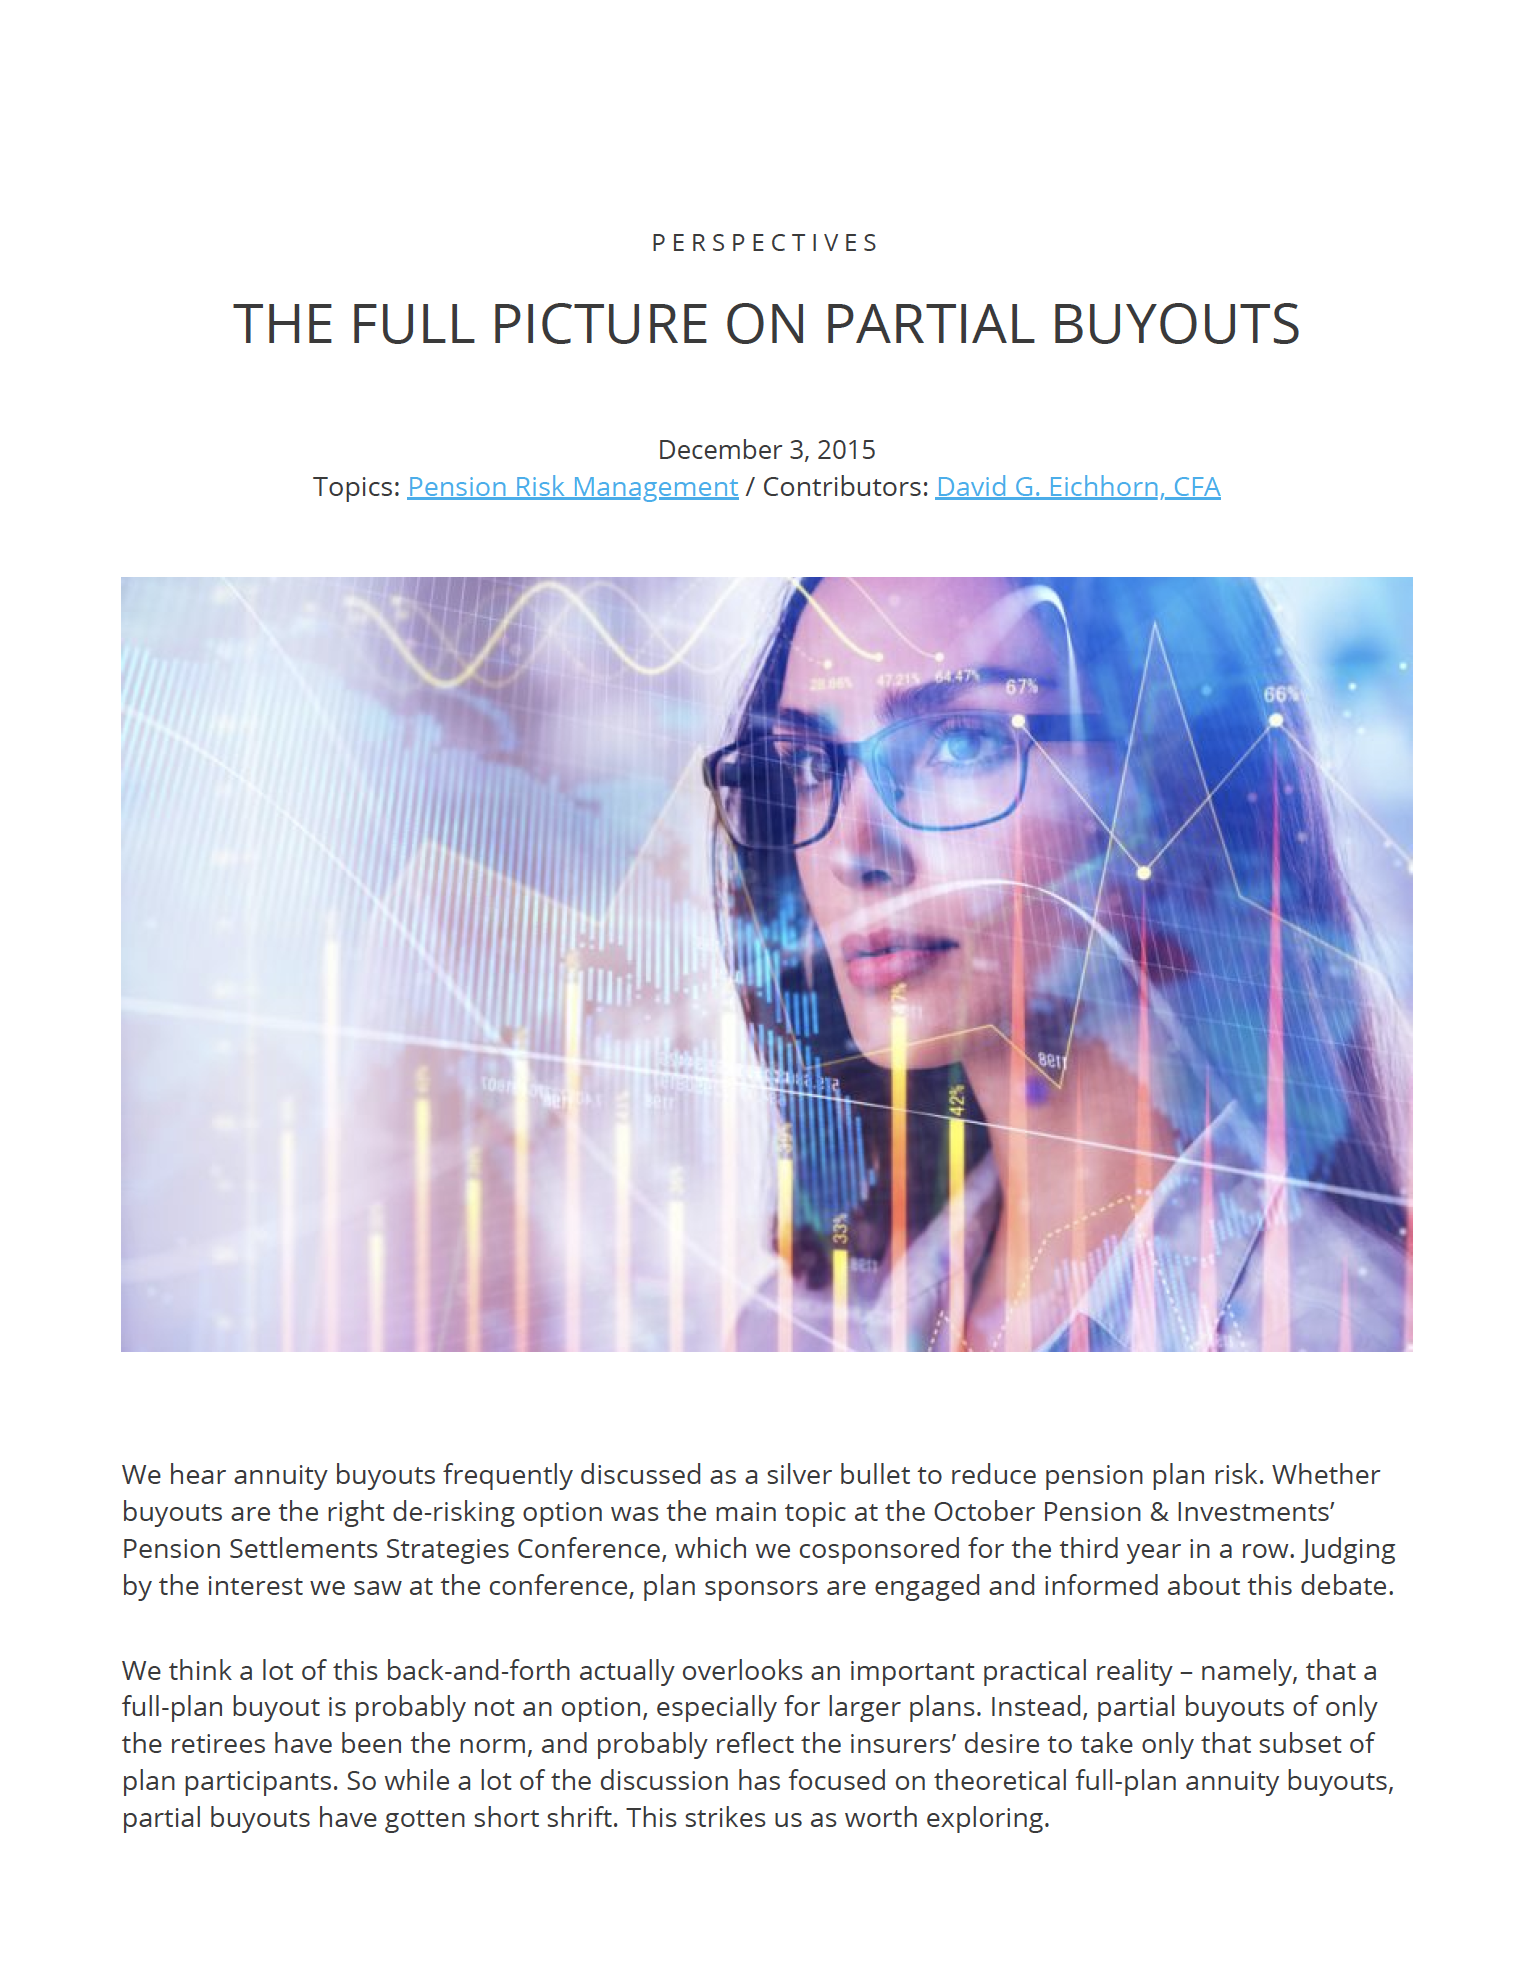 The Full Picture on Partial Buyouts Thumbnail